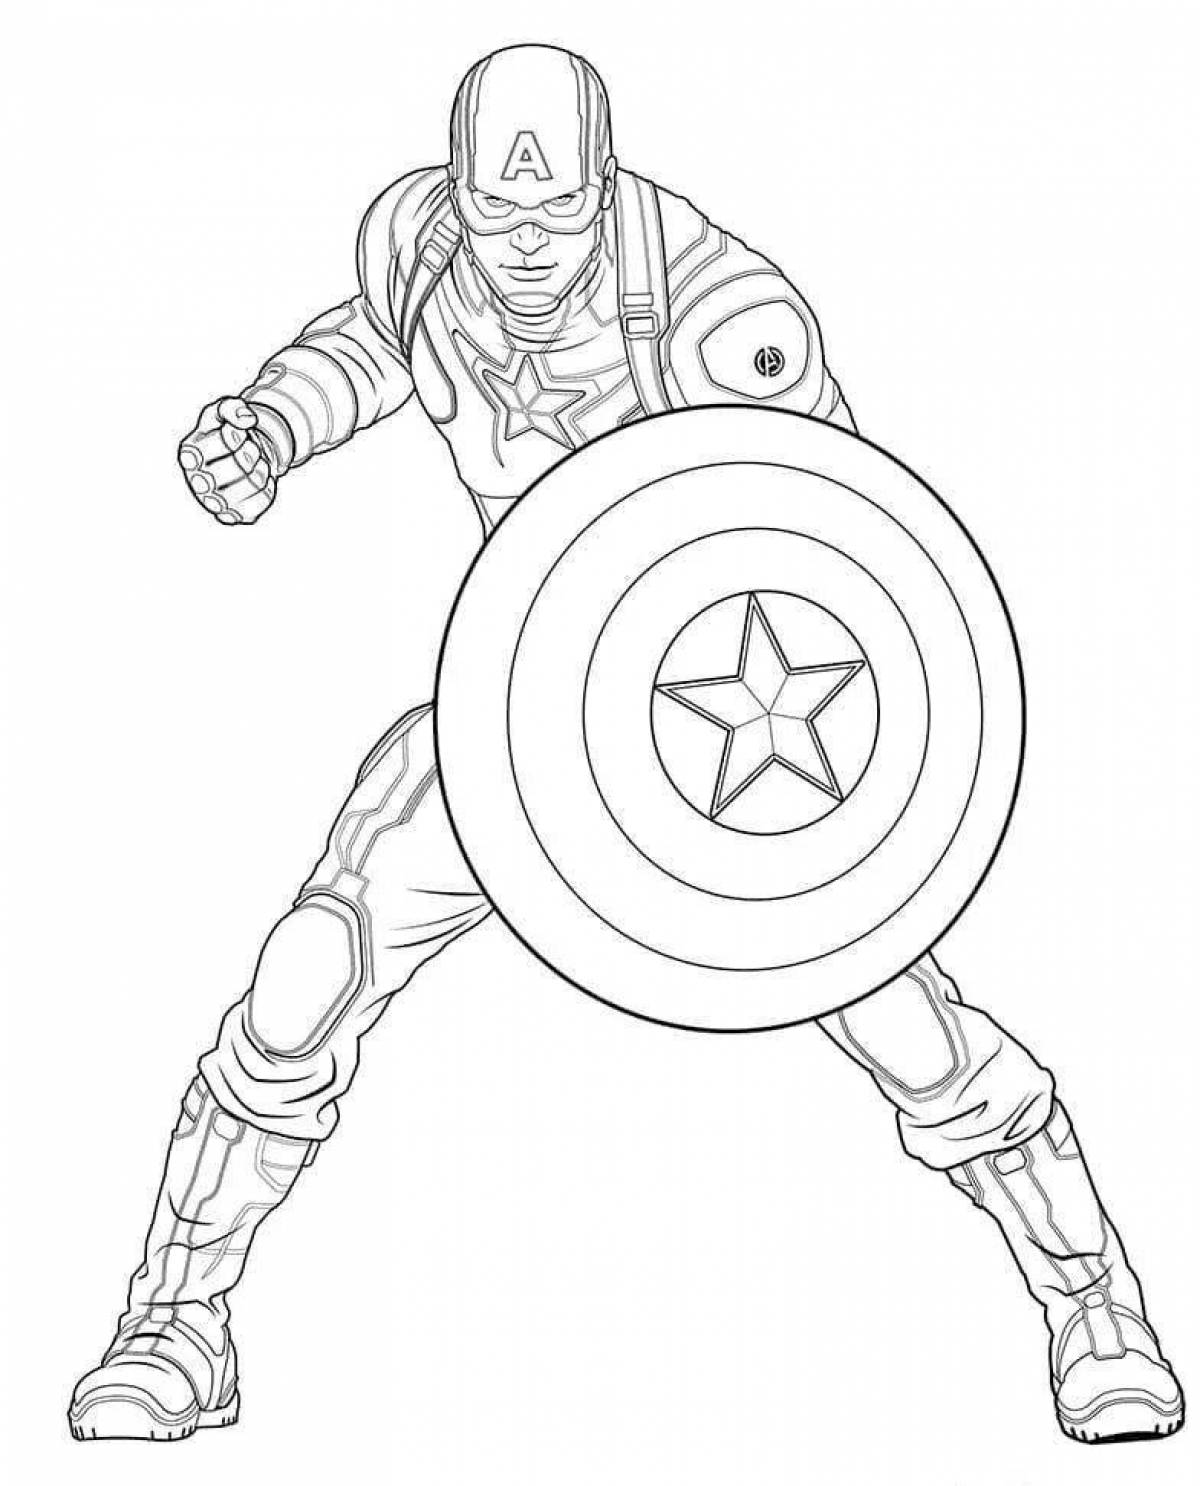 Adorable avengers coloring book